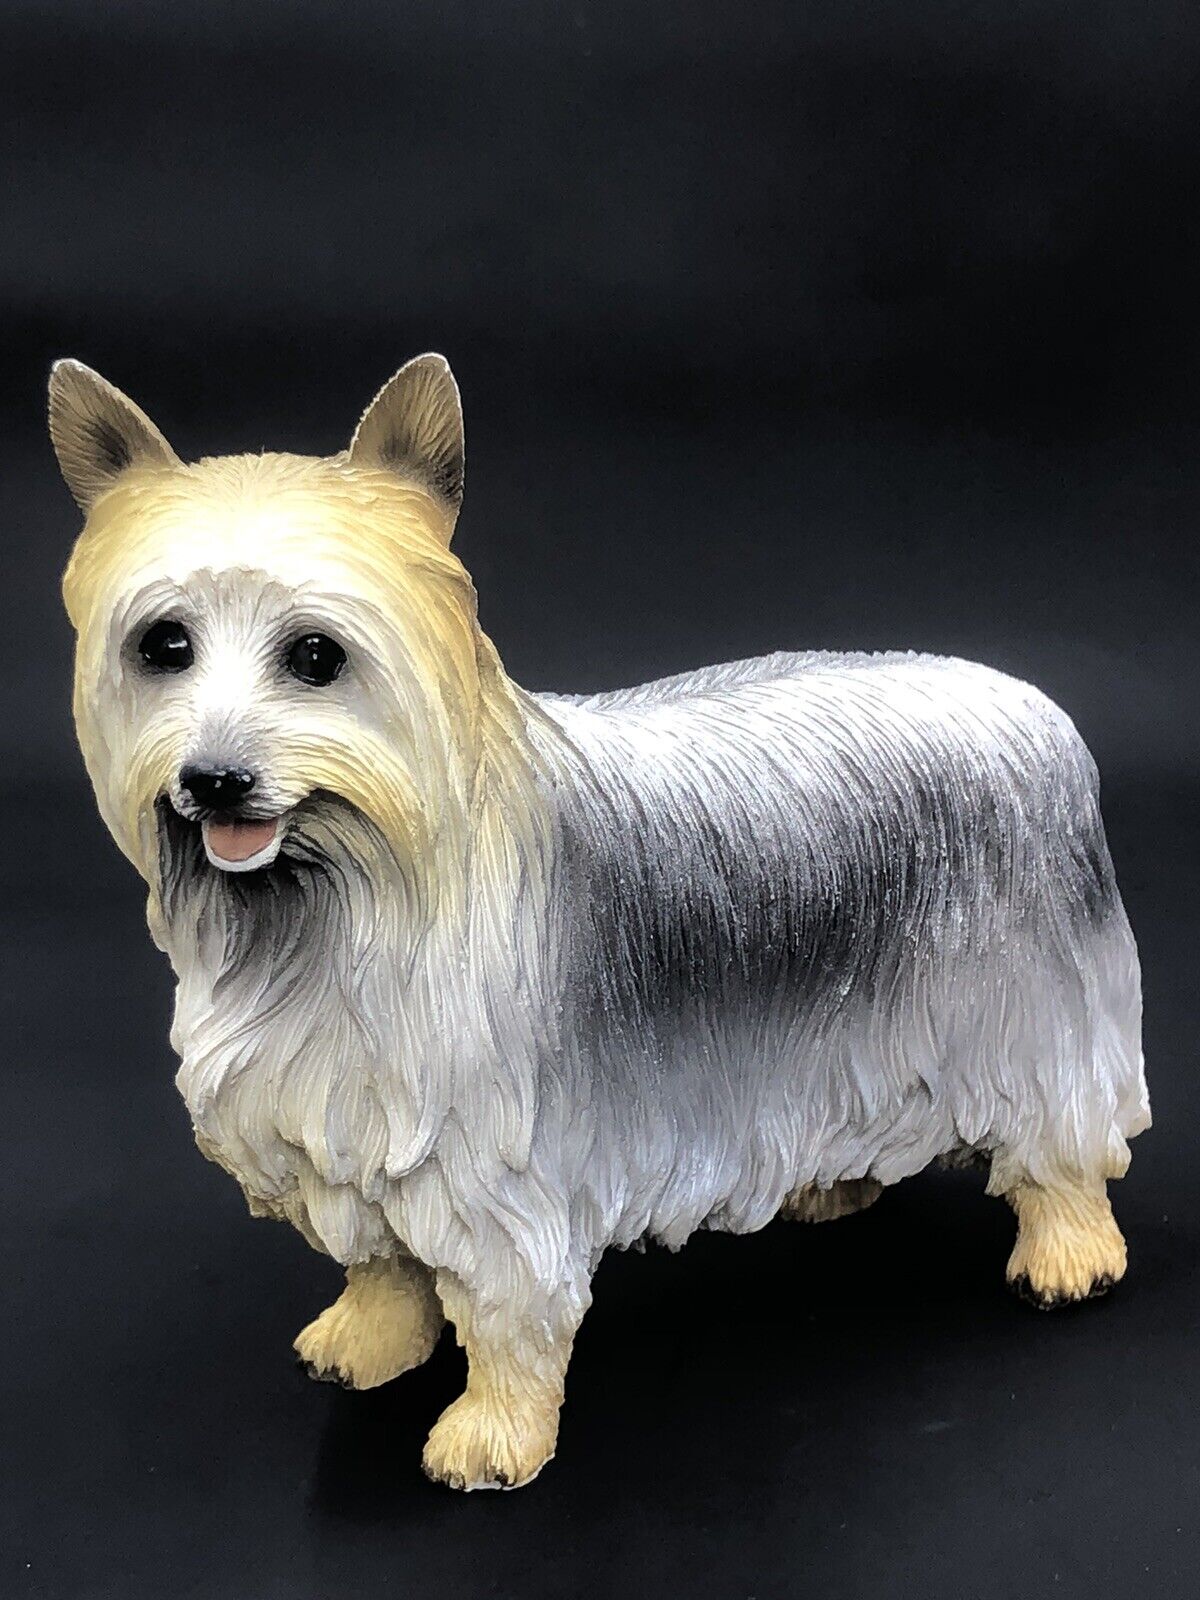 Vintage Silky Terrier Dog Statue Figurine DF93 By Lifes Attraction